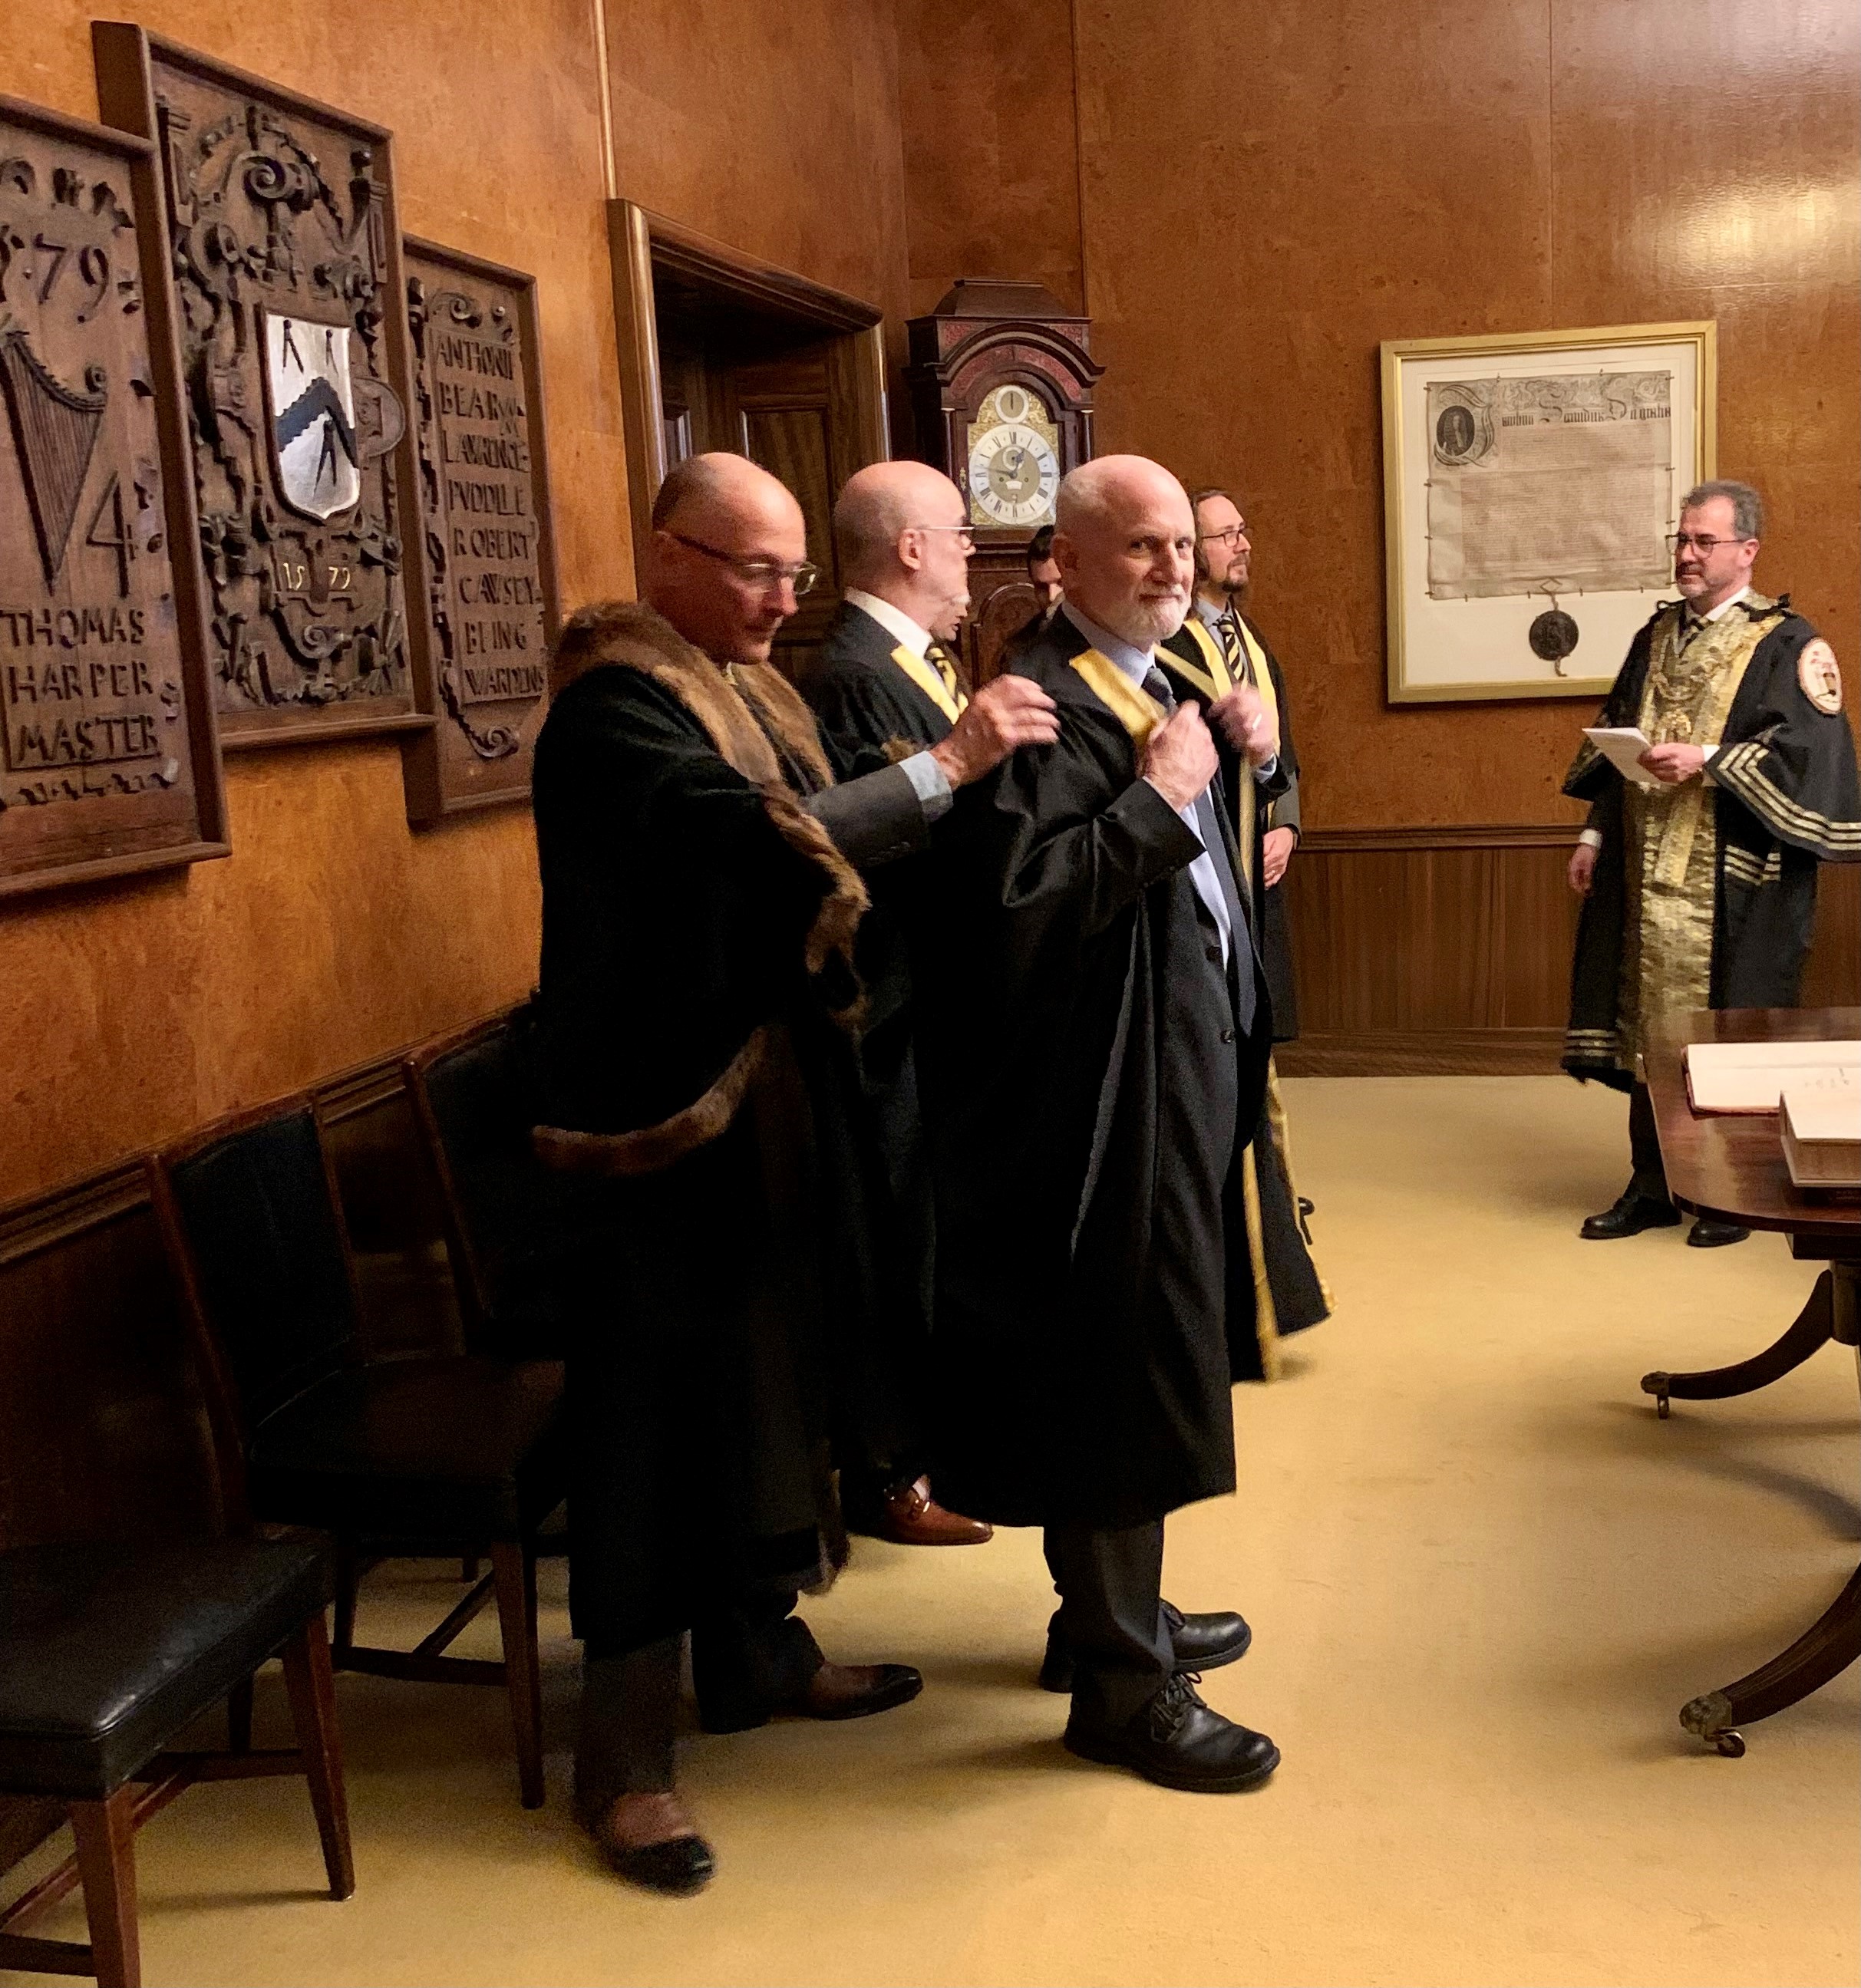 Robert Frishman in London being elevated to The Livery of the Worshipful Company of Clockmakers.